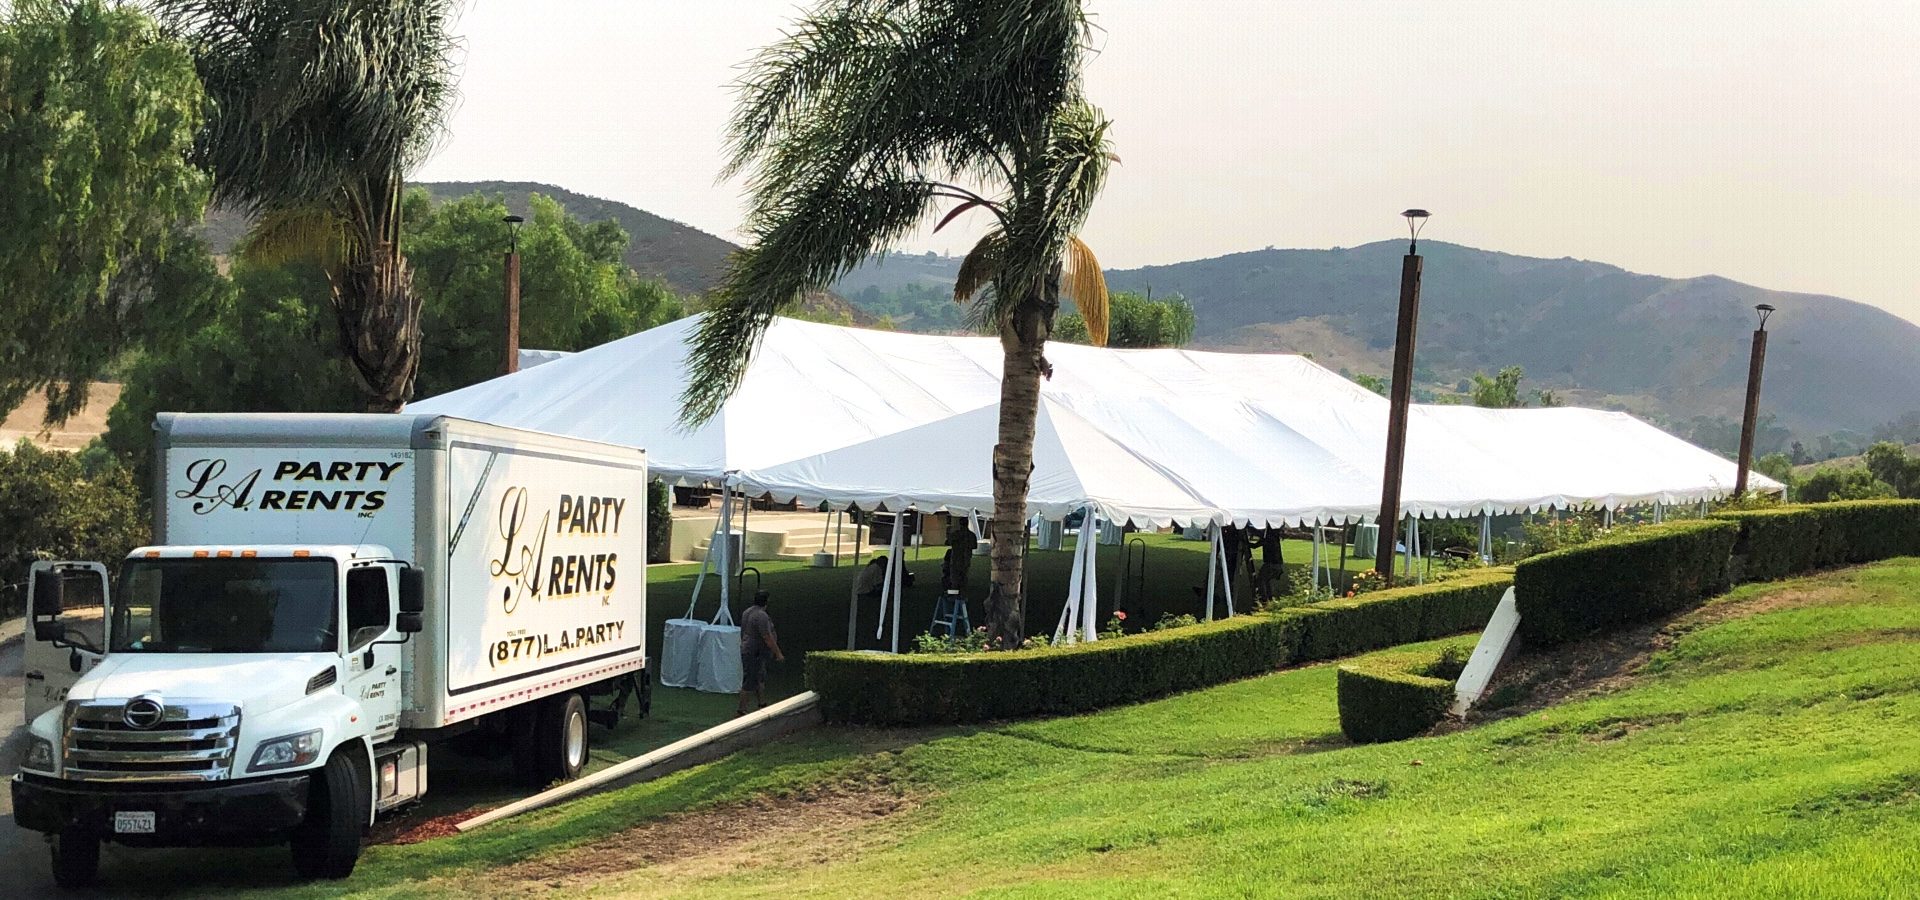 3 Basic Types and stylesof Tent Rentals Los Angeles